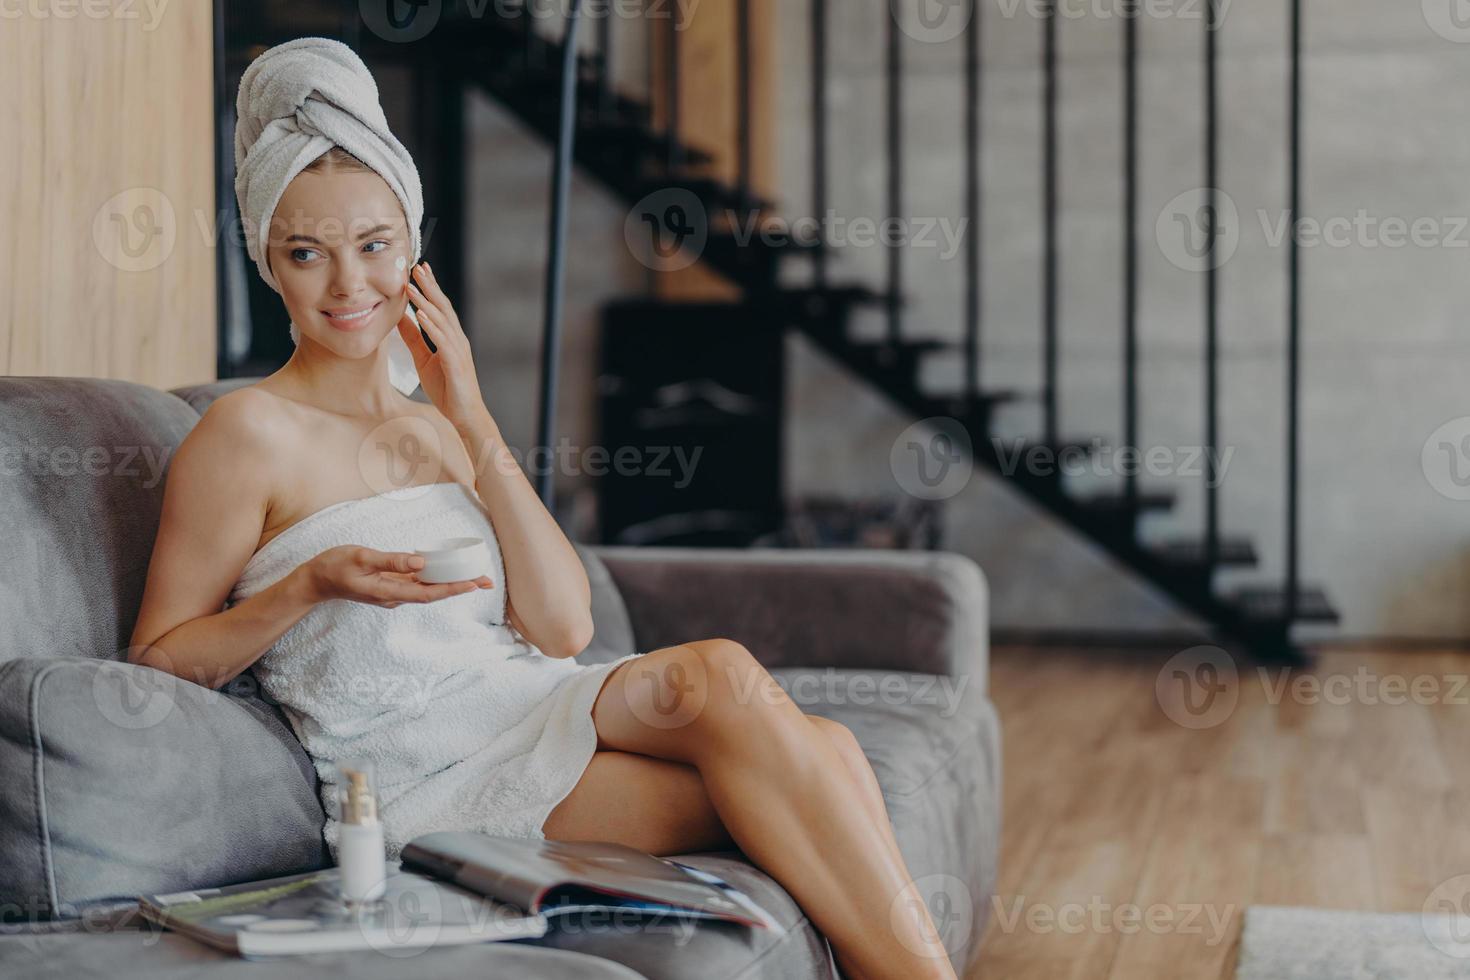 Pretty smiling European woman applies face cream on face, holds jar of cosmetic product, takes care of skin and complexion, poses on comfortable sofa with magazine against stairs background. photo